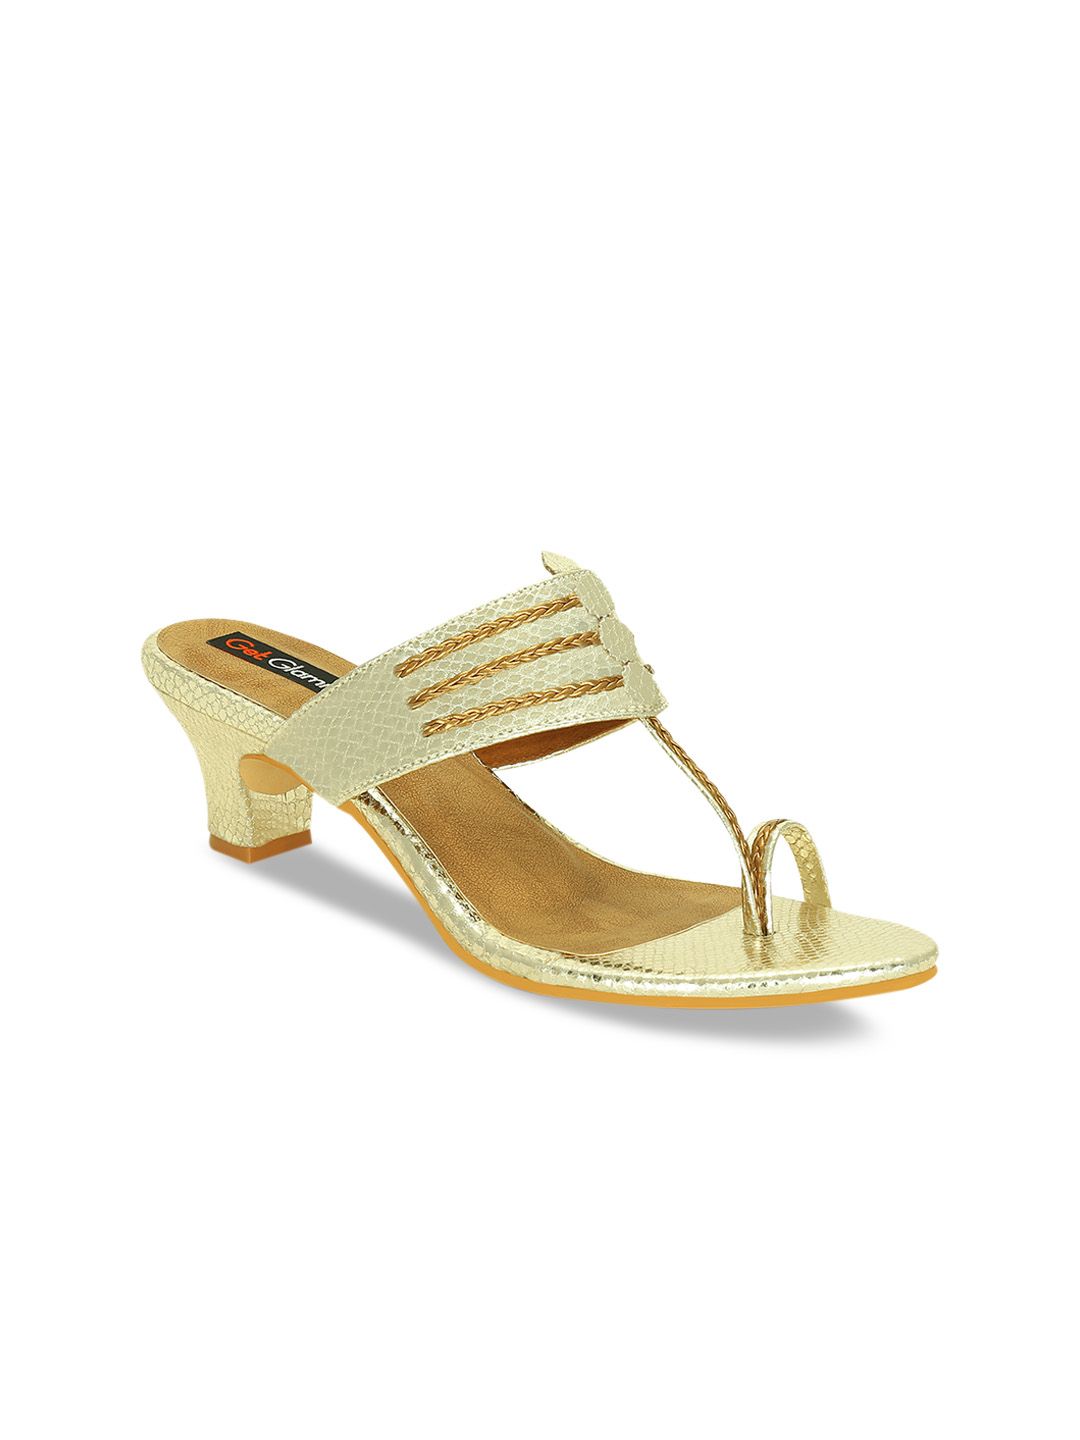 Get Glamr Women Gold-Toned Solid Heels Price in India